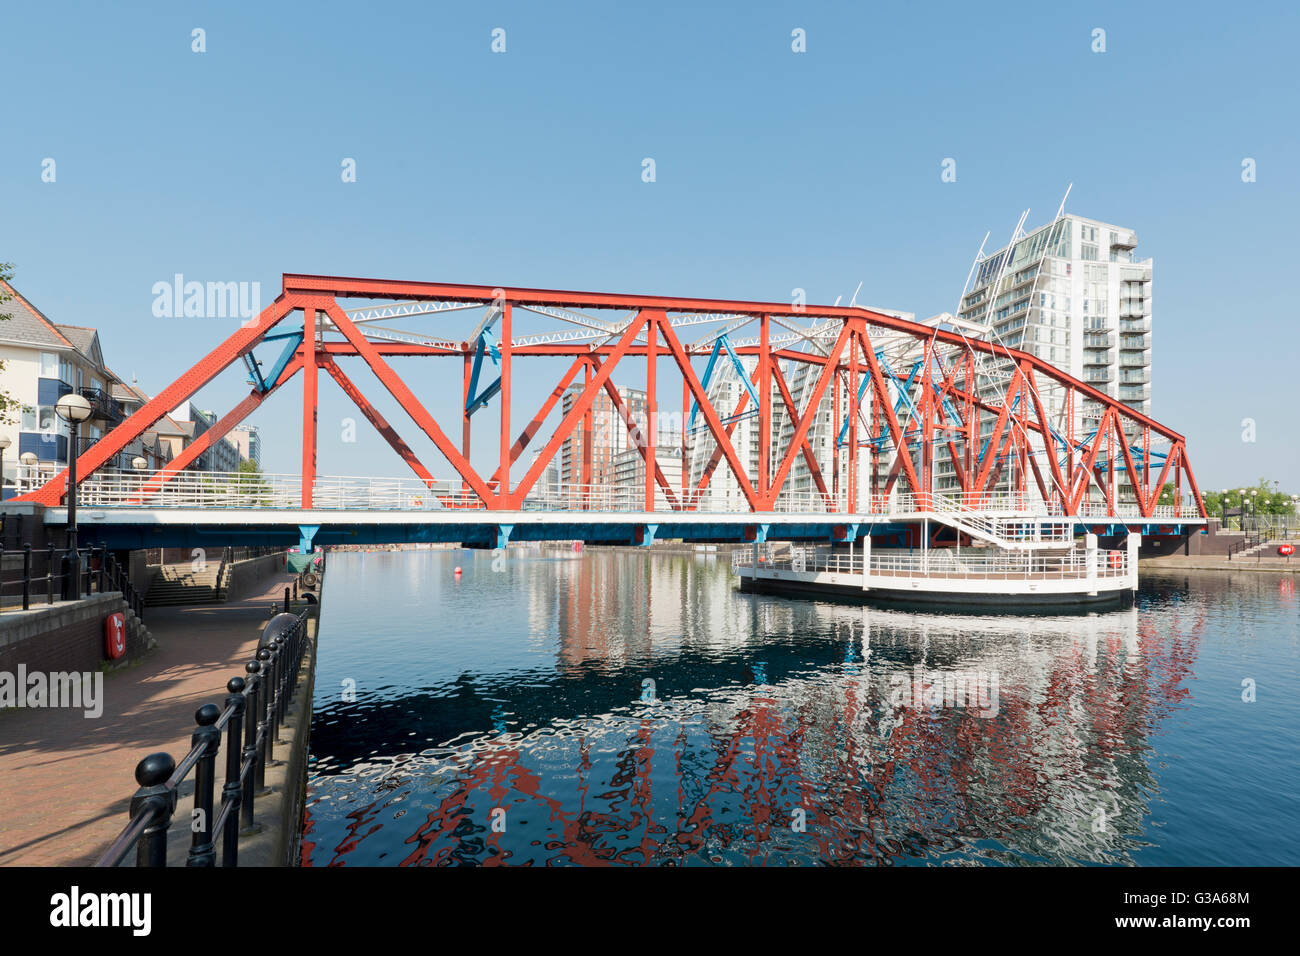 The Detroit Bridge footbridge spans the width of Dock 9 (Huron and Erie Basin) at Salford Quays in Greater Manchester. Stock Photo